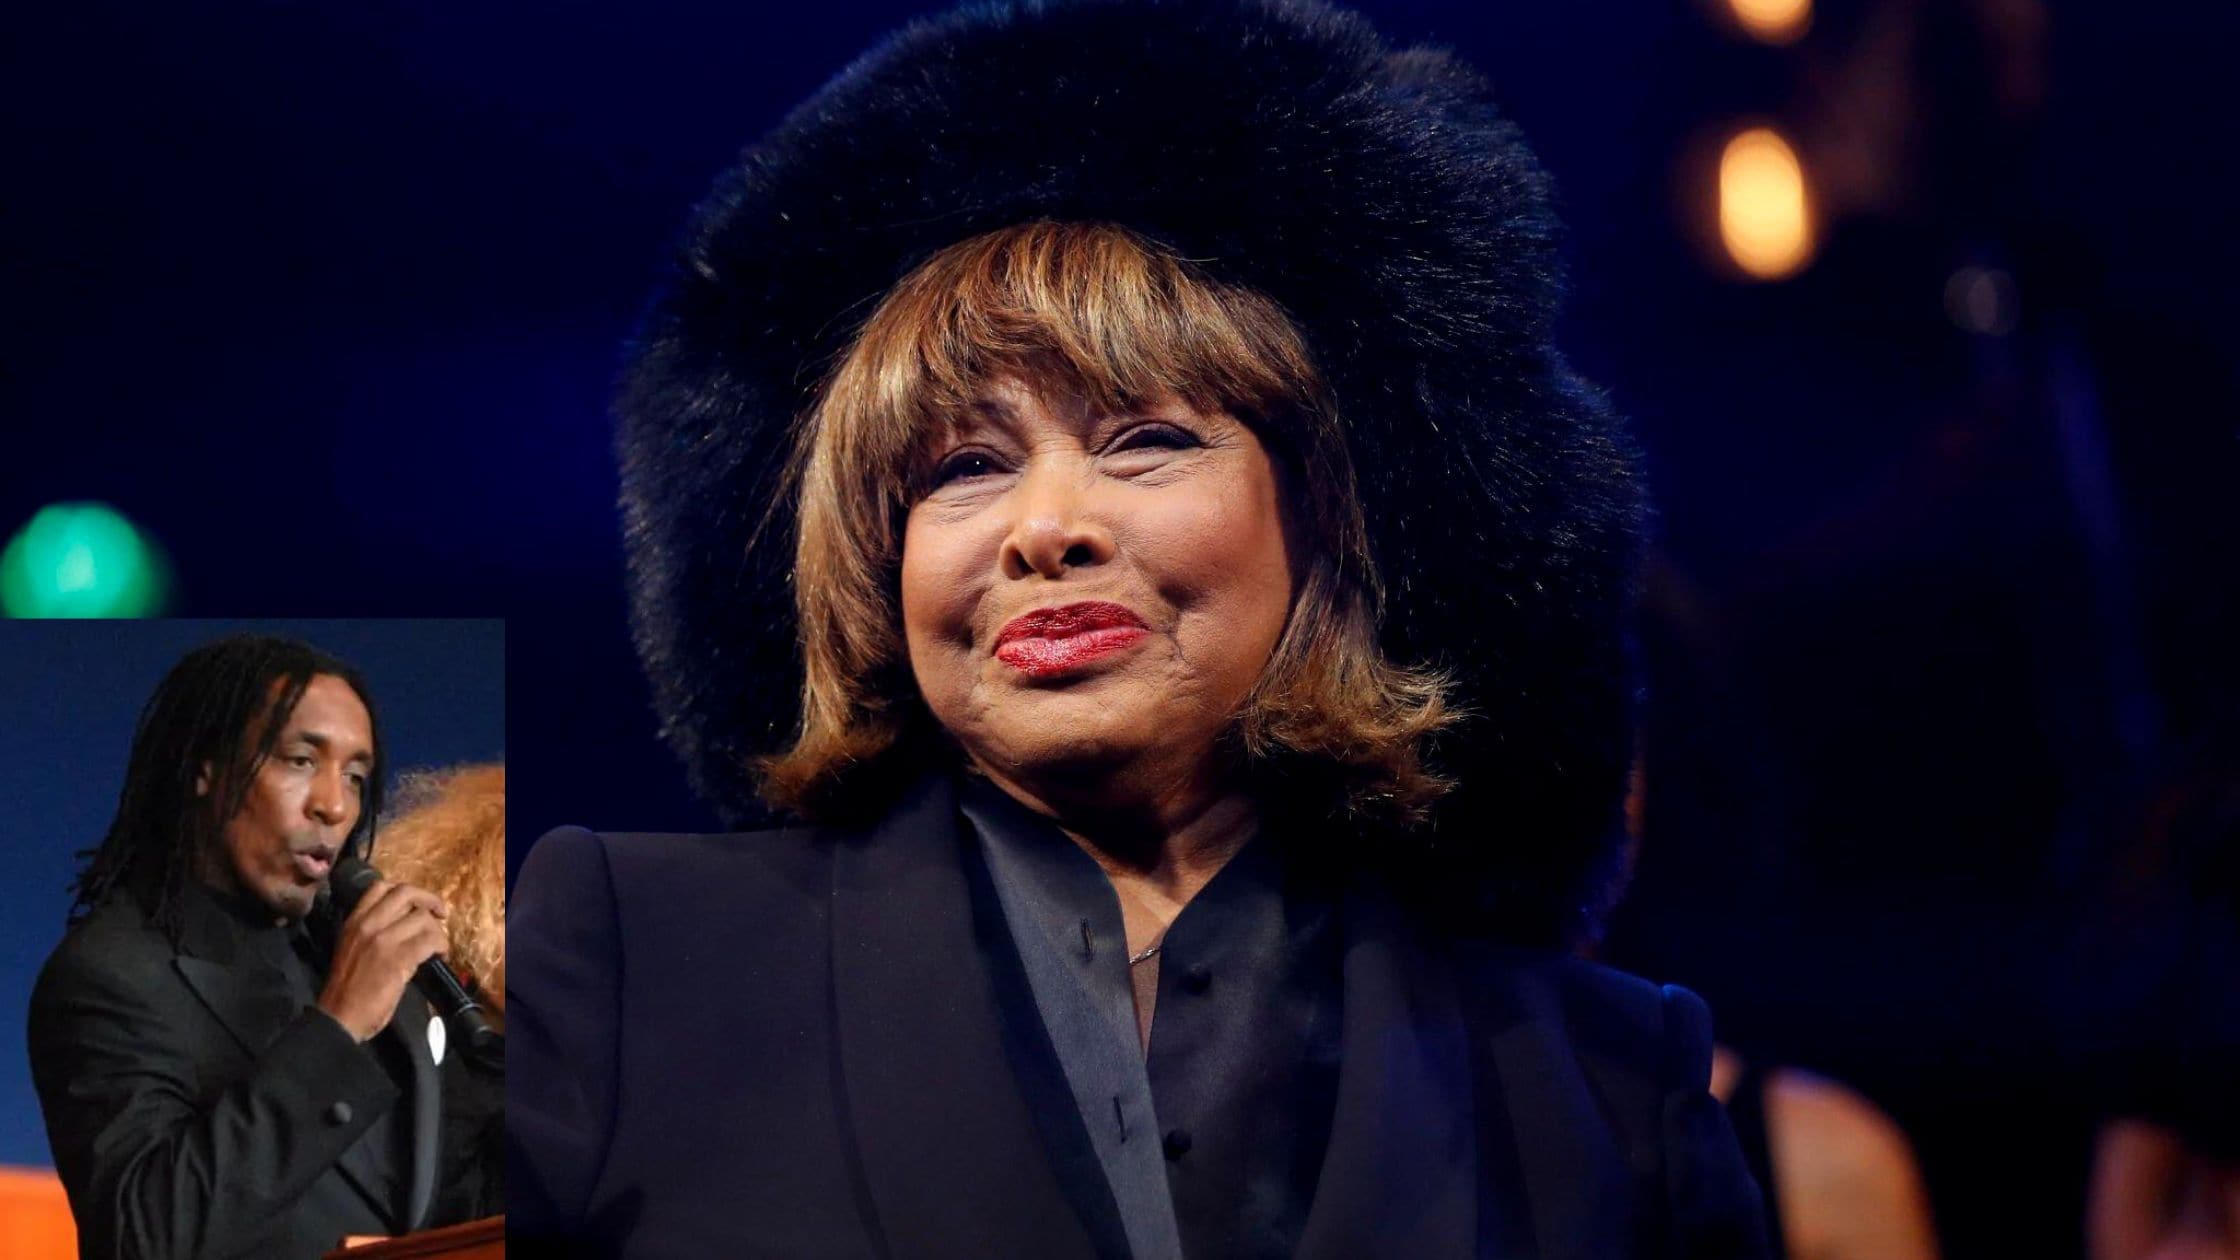 Tina Turner Is Devastated By Her Son's Unexpected Death